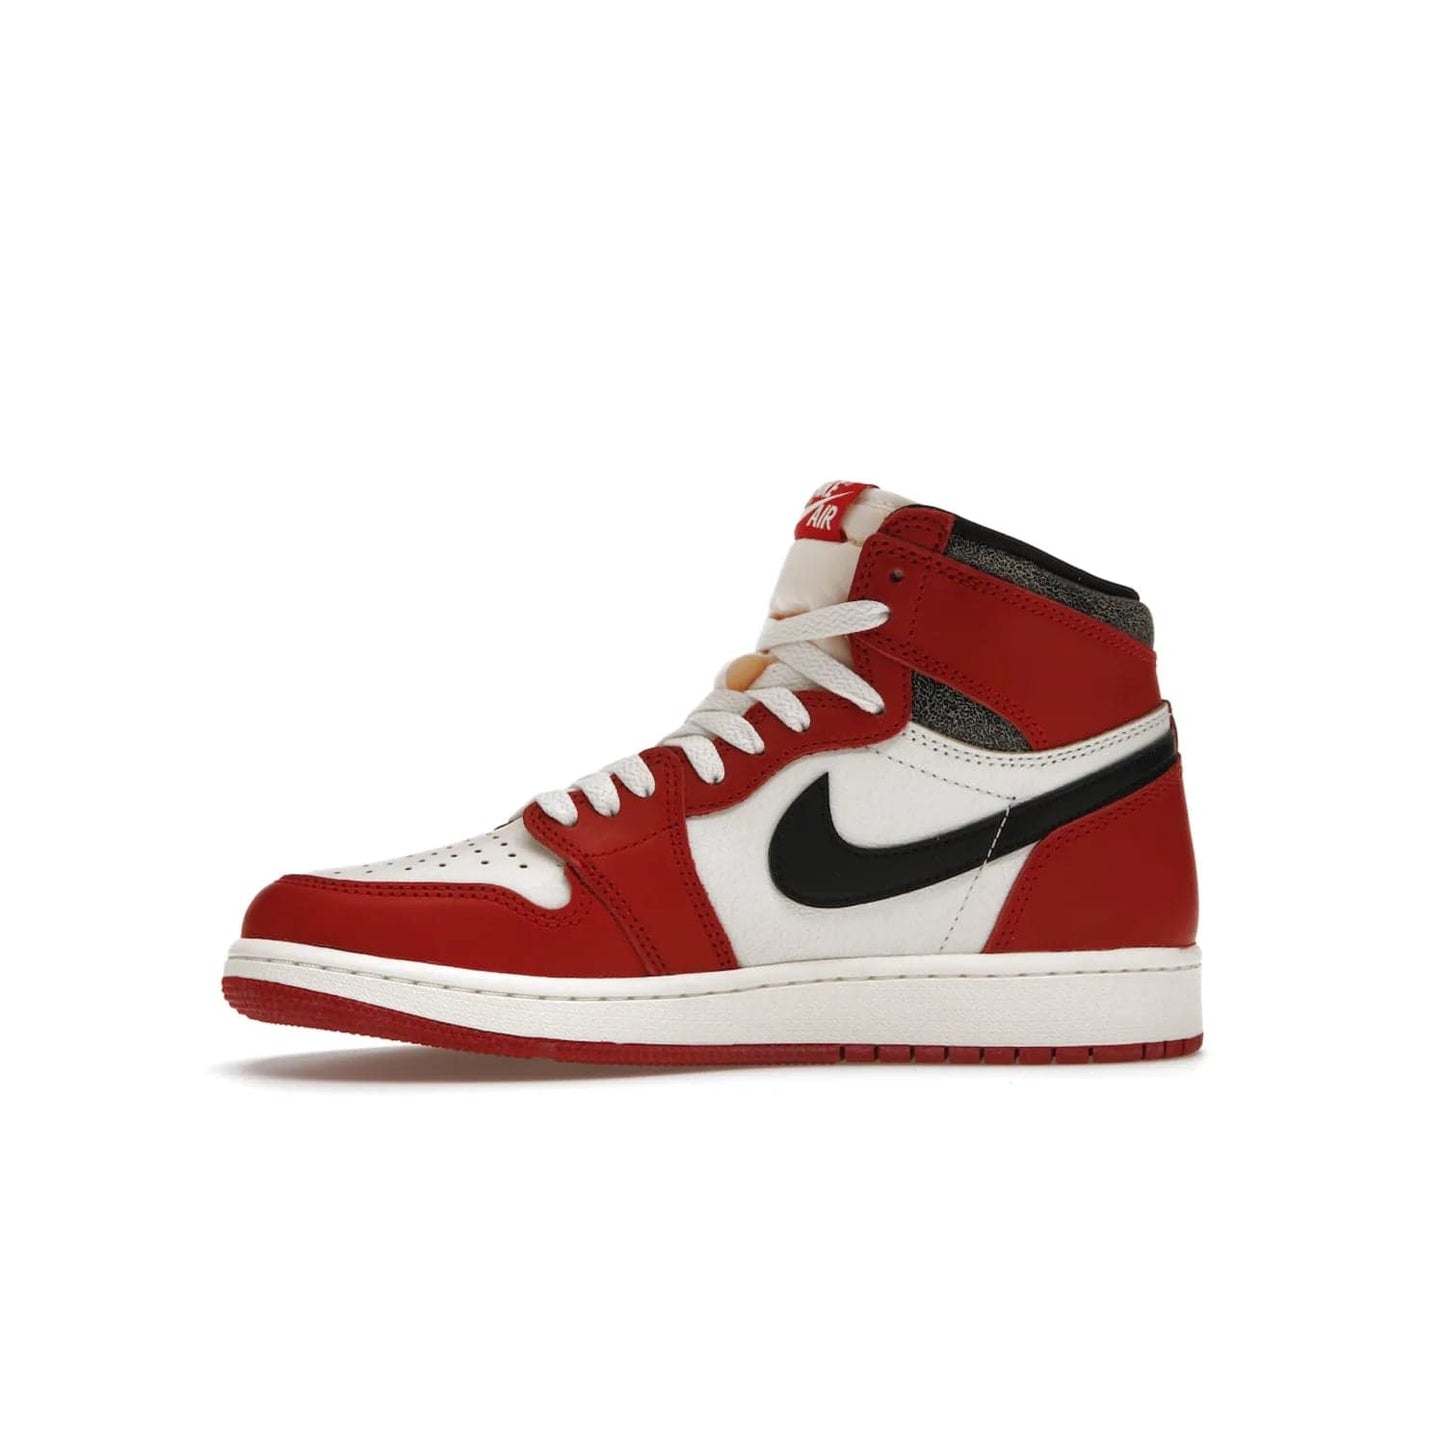 Jordan 1 Retro High OG Chicago Lost and Found (GS) - Image 18 - Only at www.BallersClubKickz.com - Grab the Air Jordan 1 Retro High OG Chicago Reimagined GS, presenting in classic 1985 silhouette. Varsity Red, Black, Muslin and Sail hues, featuring Nike Air branding, Wings on the collars and printed insoles. Don't miss out when it releases 19th Nov 2022.